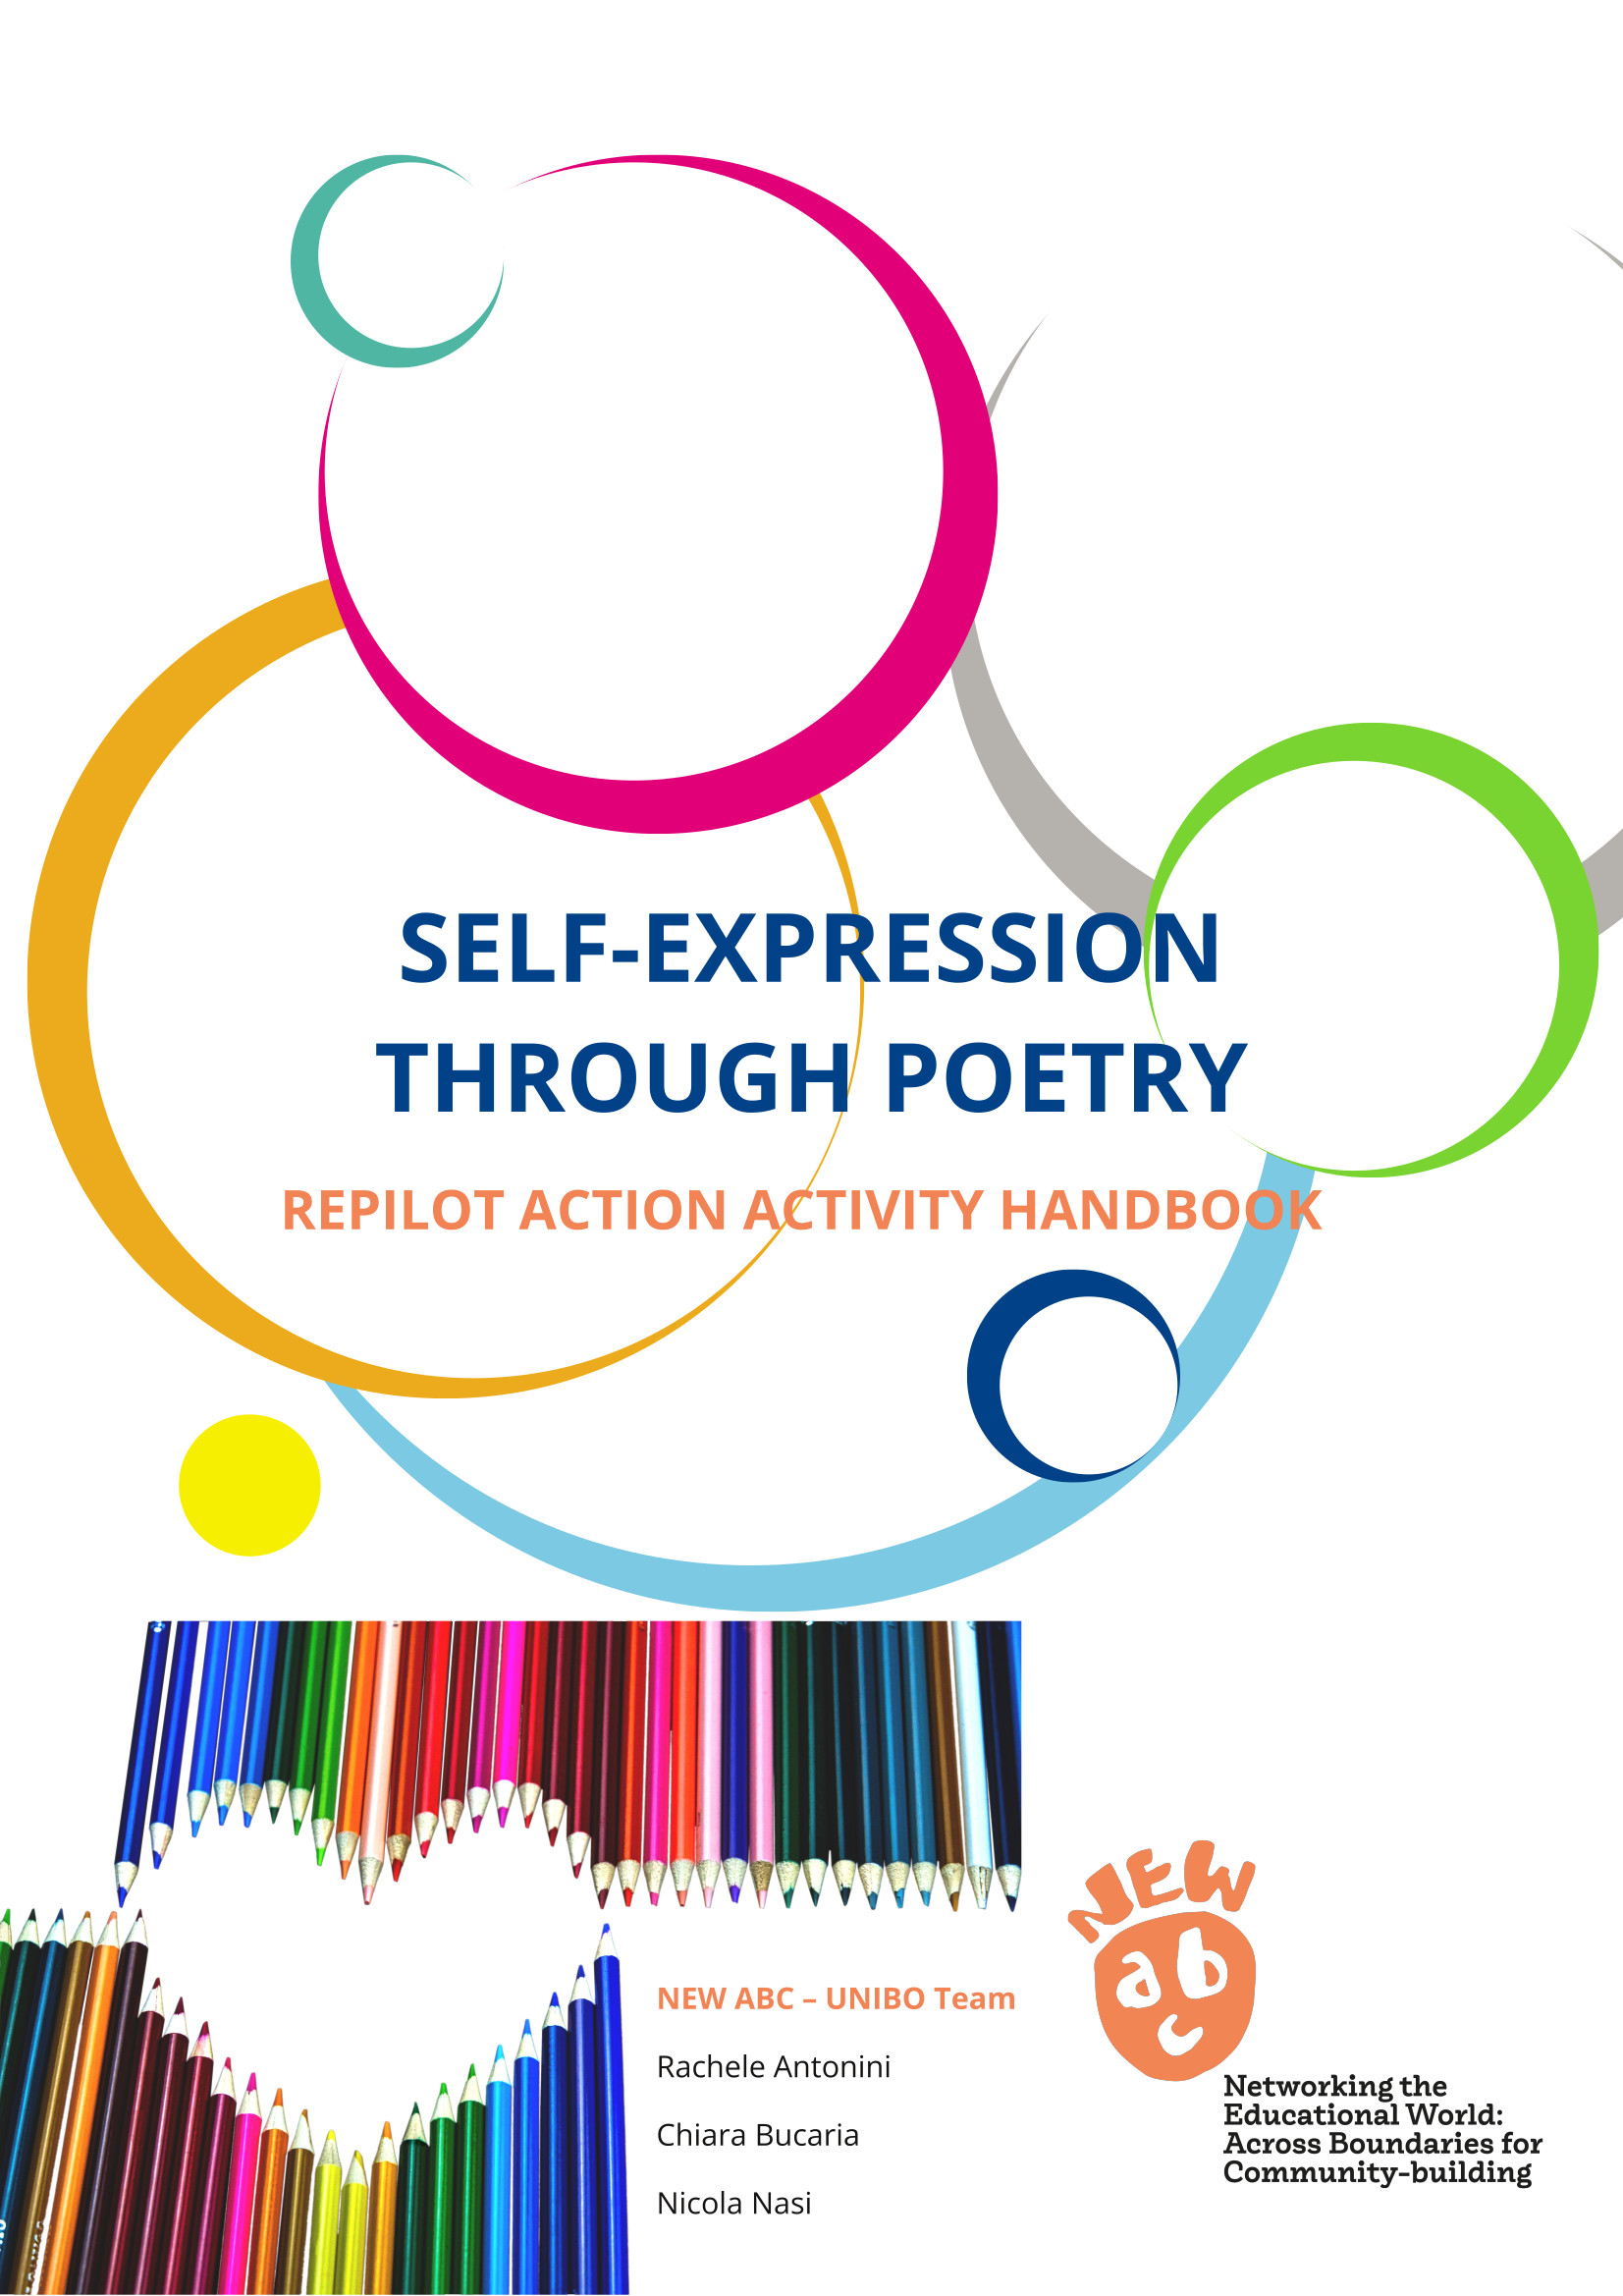 Self-Expression through Poetry